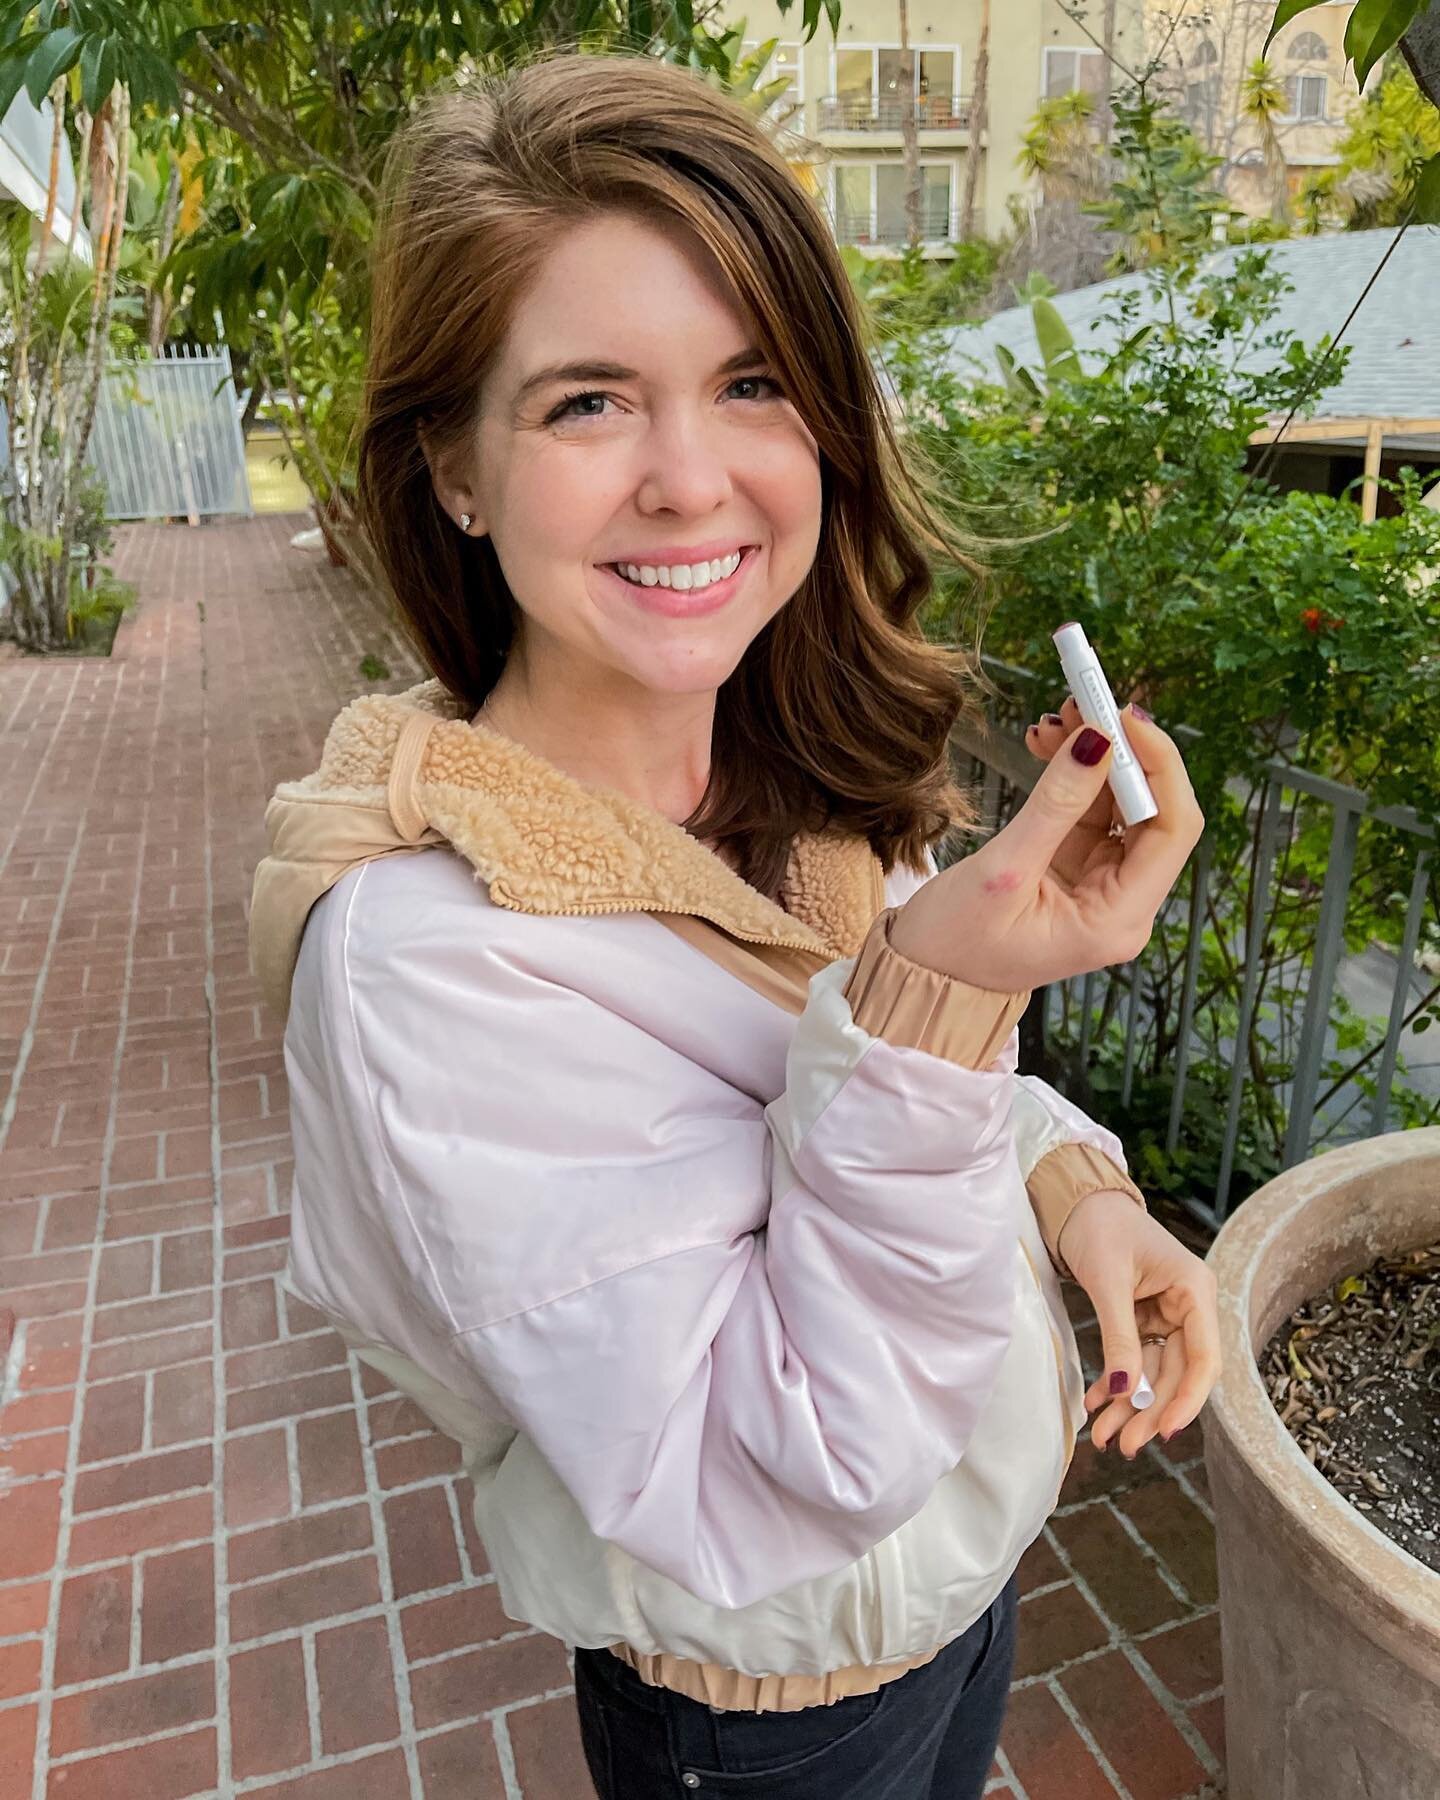 *giveaway* in honor of @primallypure &lsquo;s 6th birthday 💓 today they launched a rose + mint tinted lip balm. It&rsquo;s similar to the holiday one they launched, but a little lighter in color and of course the rose scent! Still just as great and 